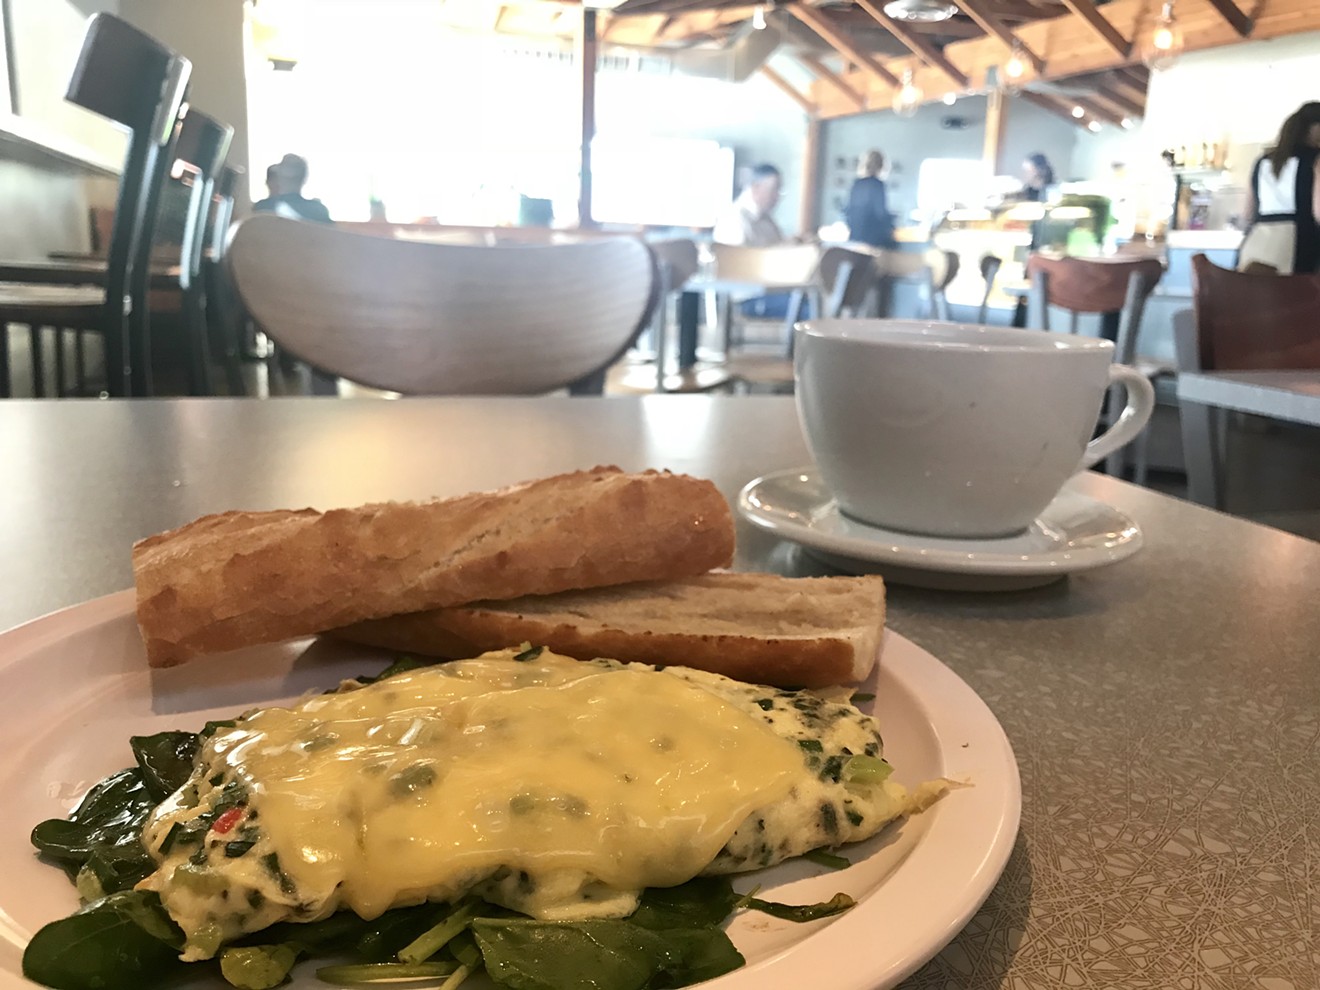 Scrambled eggs and local peppers on a bed of spinach, topped with Dubliner cheddar. As with many Essence dishes, two slices of baguette are served on the side, along with butter, jam, and local  honey.